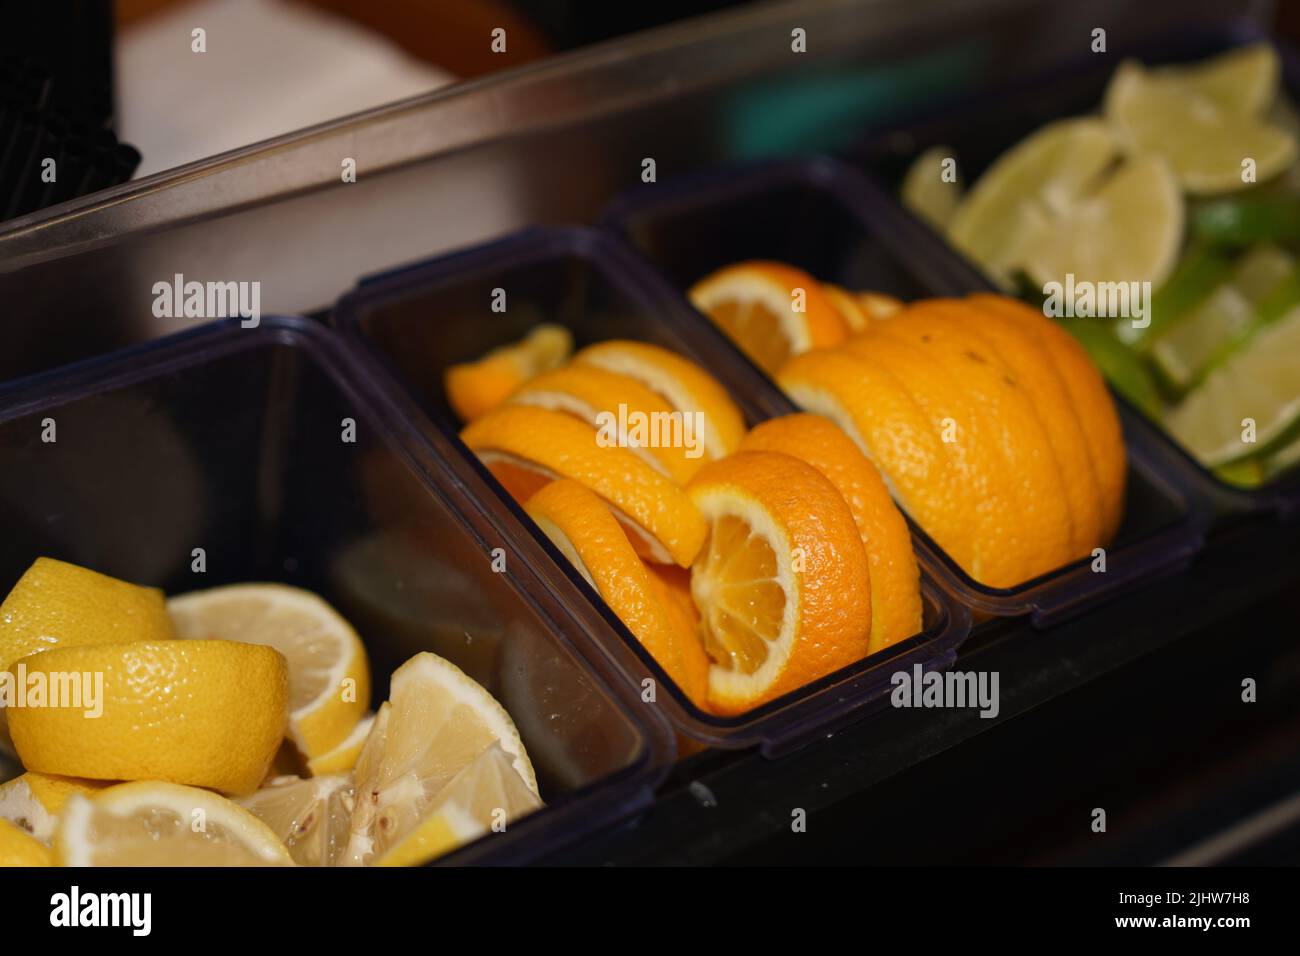 Assorted slices of fruit have been prepared and ready for use as garnishes in mixed adult drinks. Stock Photo